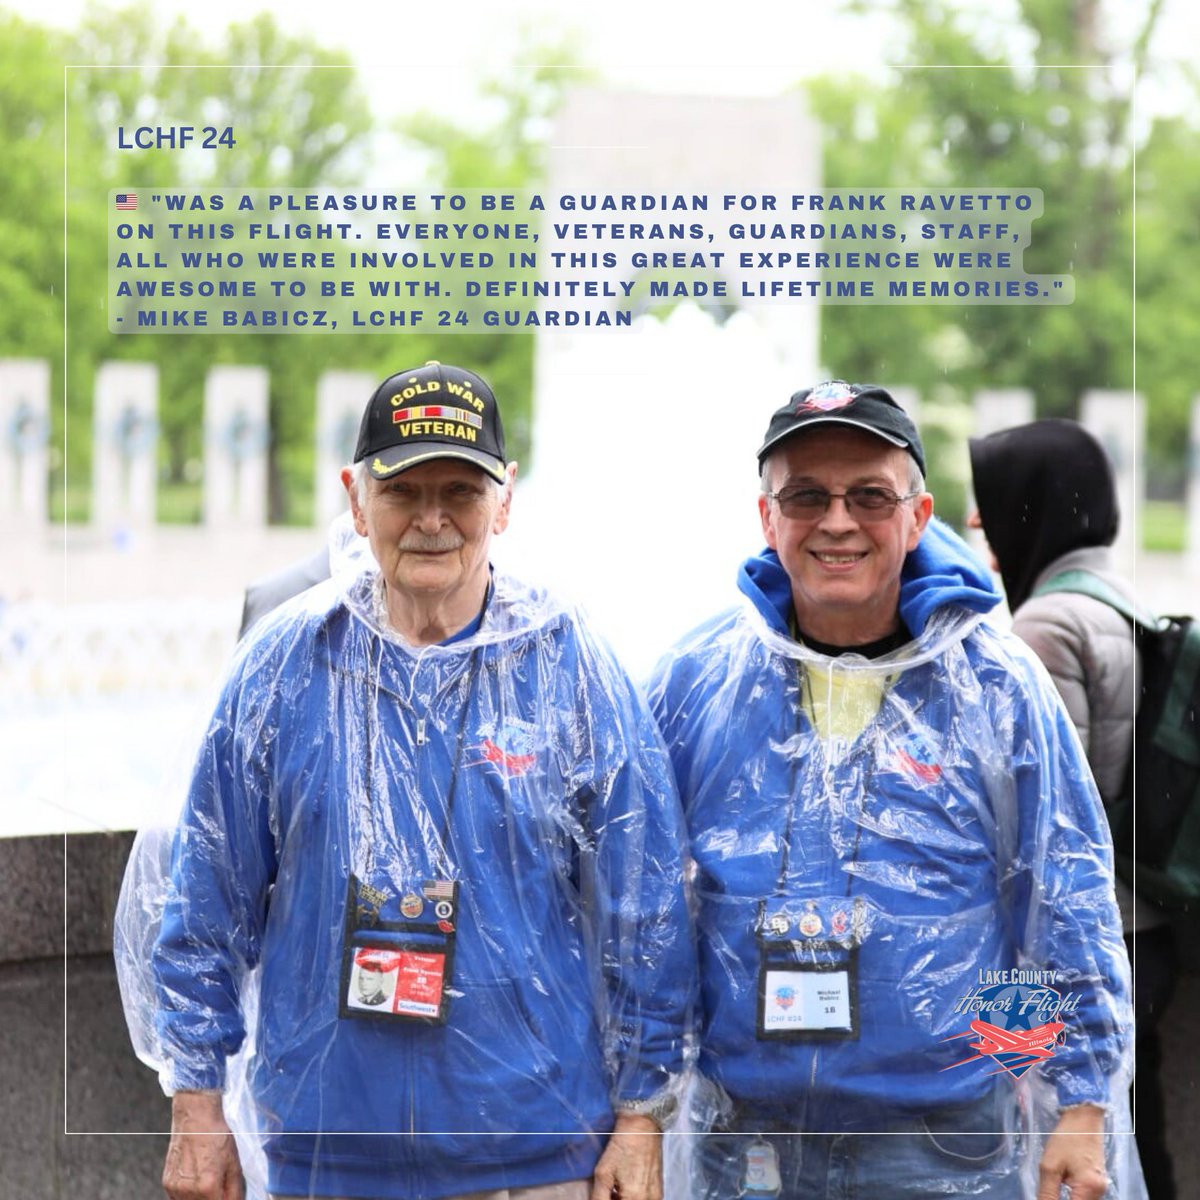 🇺🇸 'Was a pleasure to be a Guardian for Frank Ravetto on this flight. Everyone, veterans, Guardians, staff, all who were involved in this great experience were awesome to be with. Definitely made lifetime memories.' - Mike Babicz, LCHF 24 Guardian 
#lchf24 #honorflight